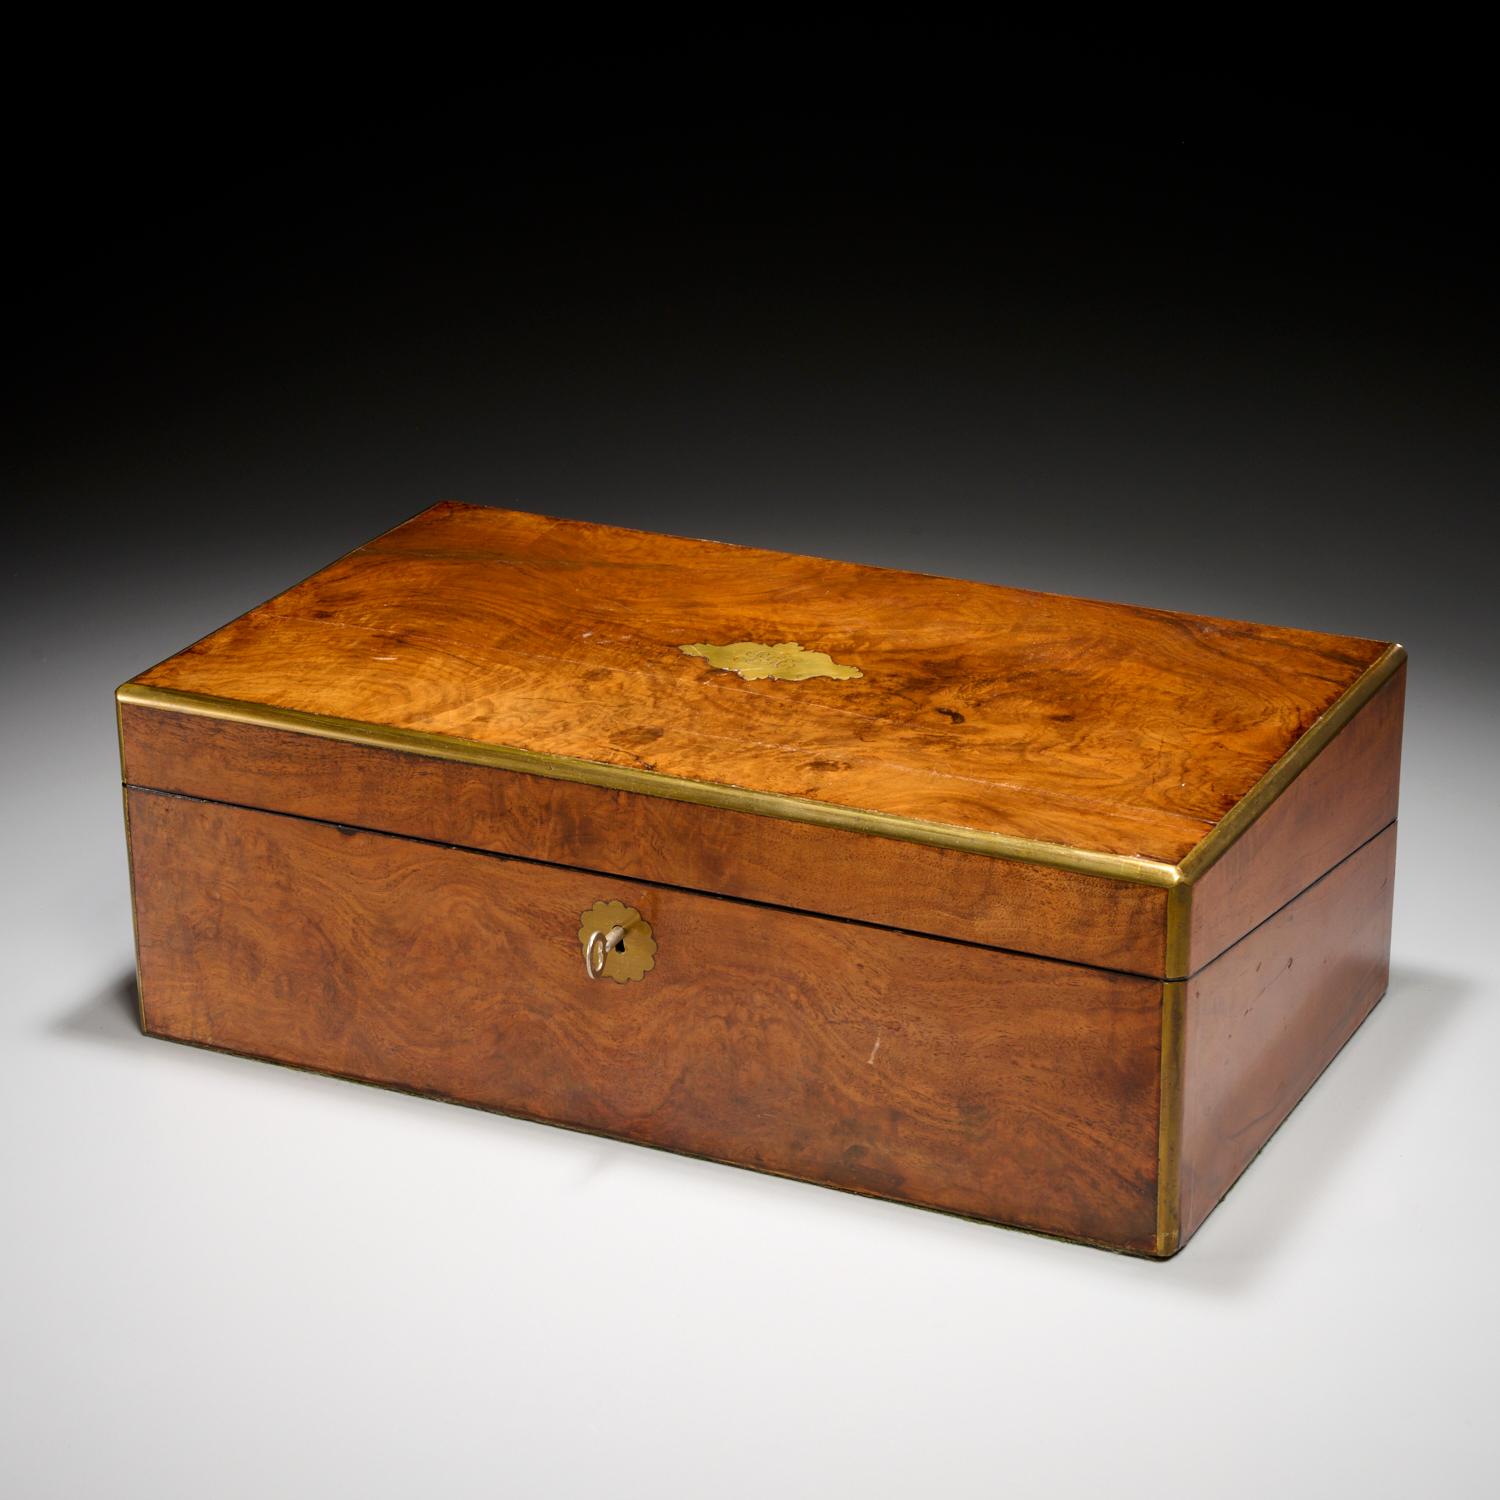 19th c., England, a figured mahogany lap desk banded in brass to protect a piece that was in regular use and likely travelled with the owner.

The hinged top opens to a gilt tooled leather writing surface and fitted storage compartments. The fitted